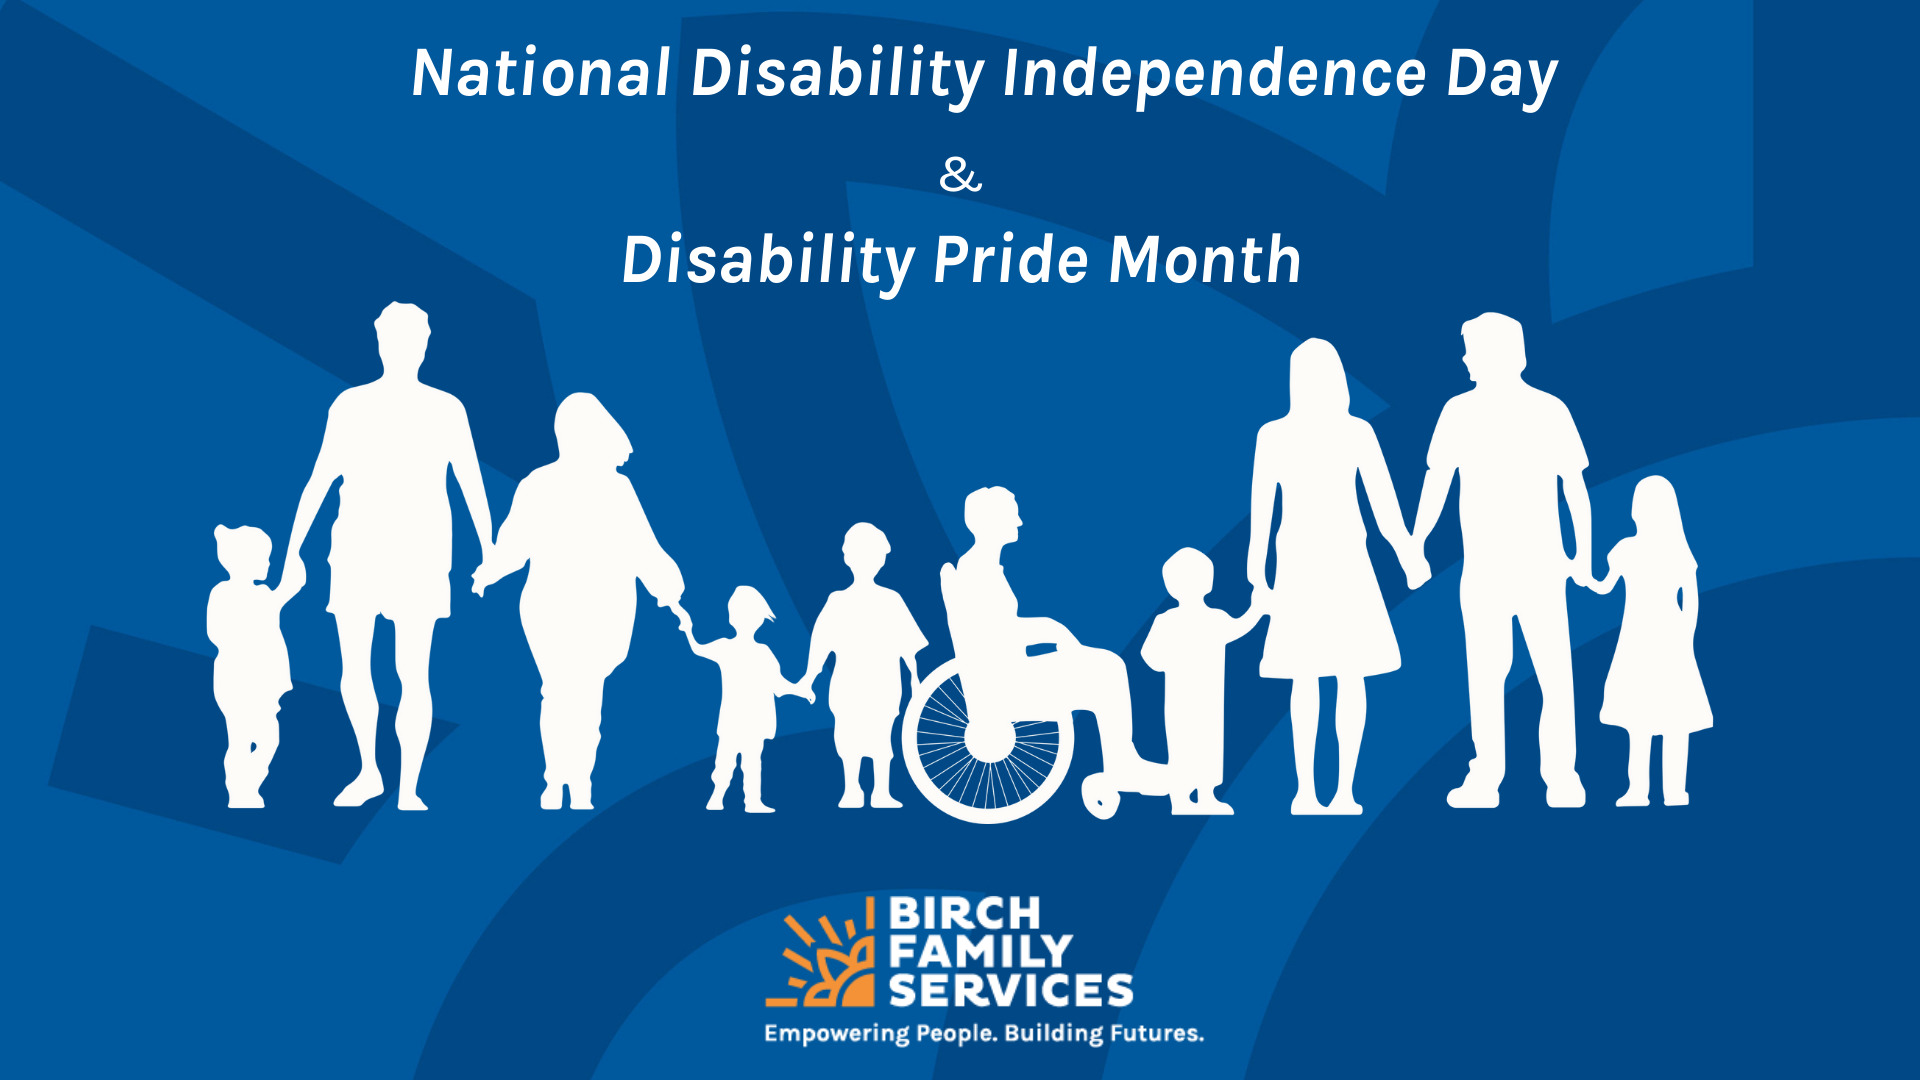 A Message from our CEO to Celebrate and Honor National Disability